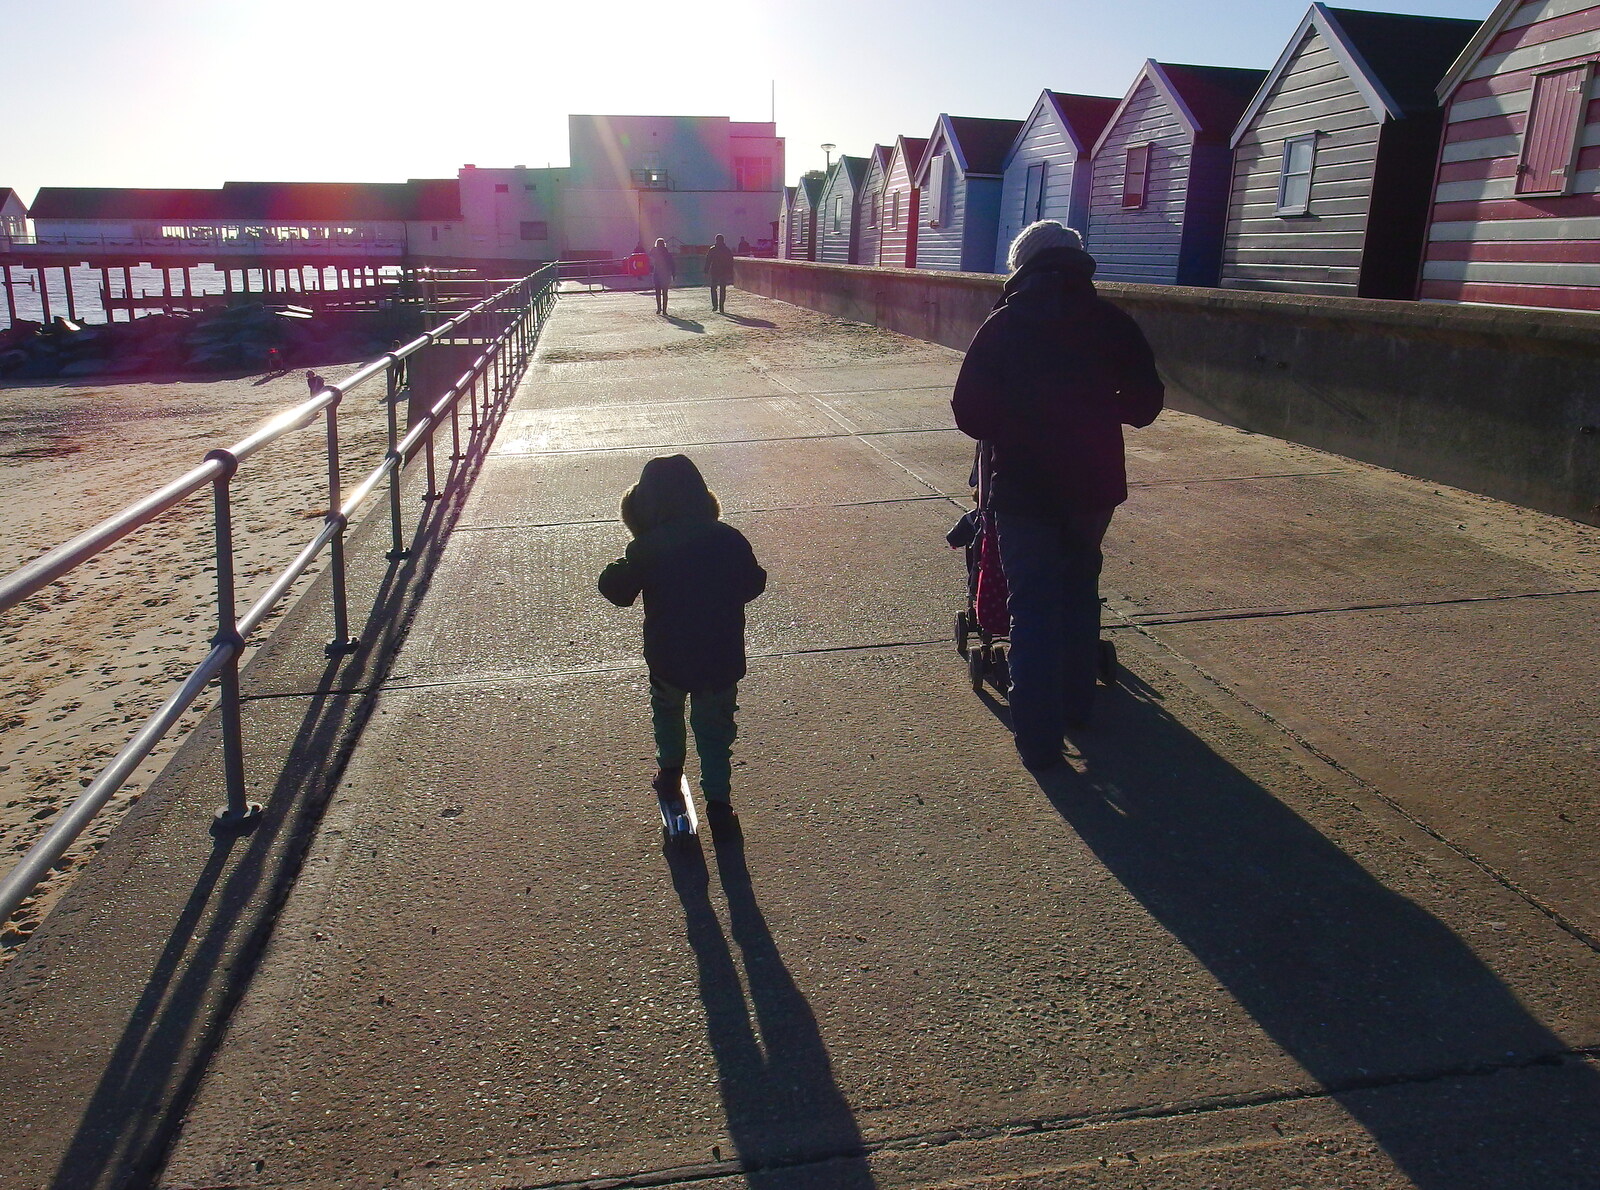 Fred and Isobel on the prom, contra jour from Post-Christmas Southwold, Suffolk - 29th December 2013